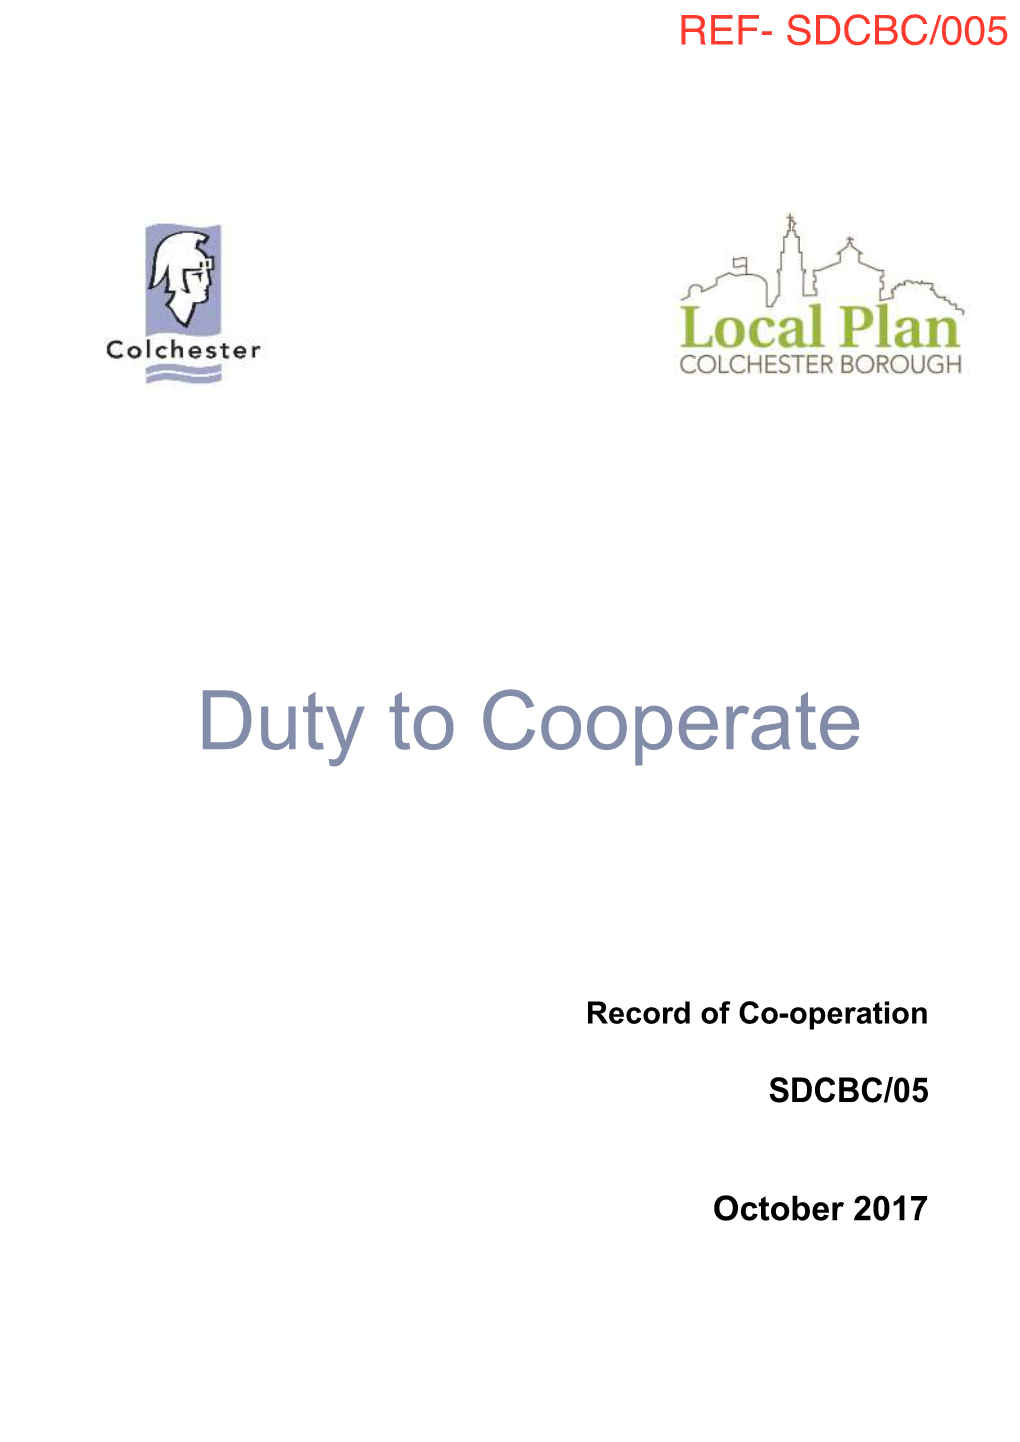 Colchester Borough Council Has Met the Requirements of the Duty to Cooperate in Preparing Its Local Plan